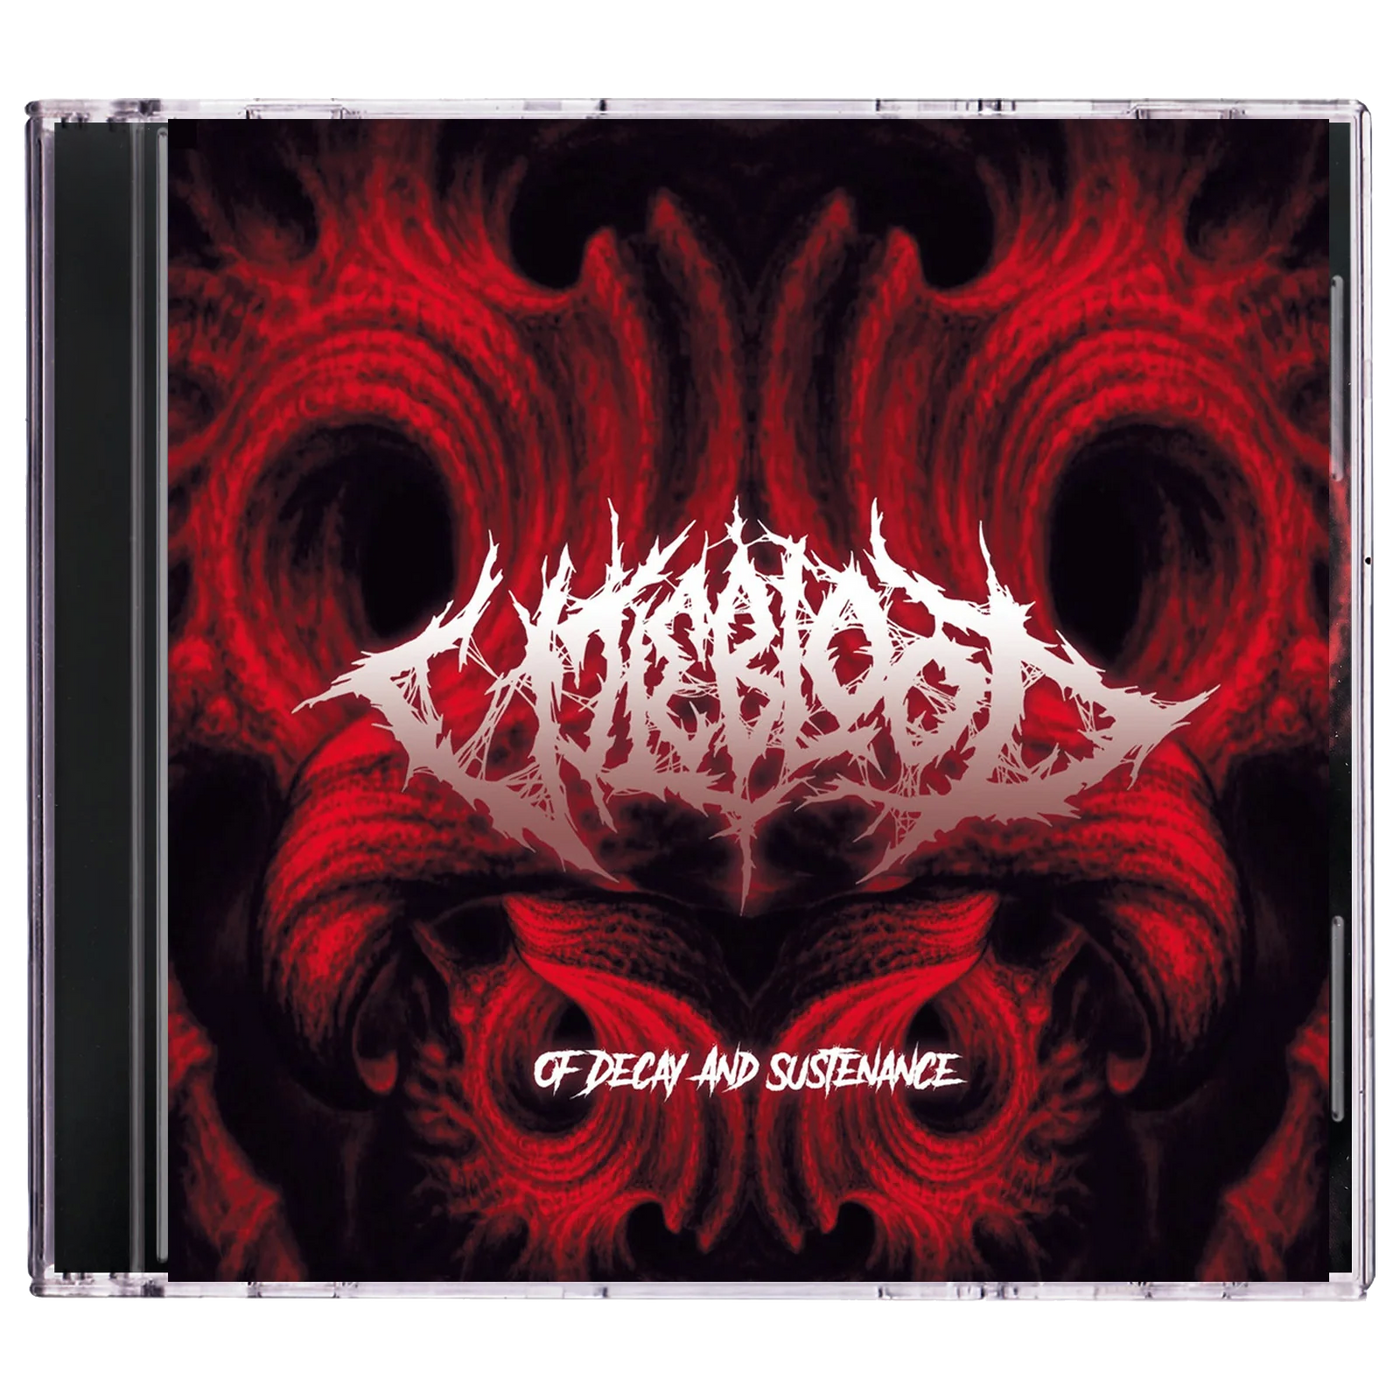 Vileblood 'Of Decay And Sustenance' CD